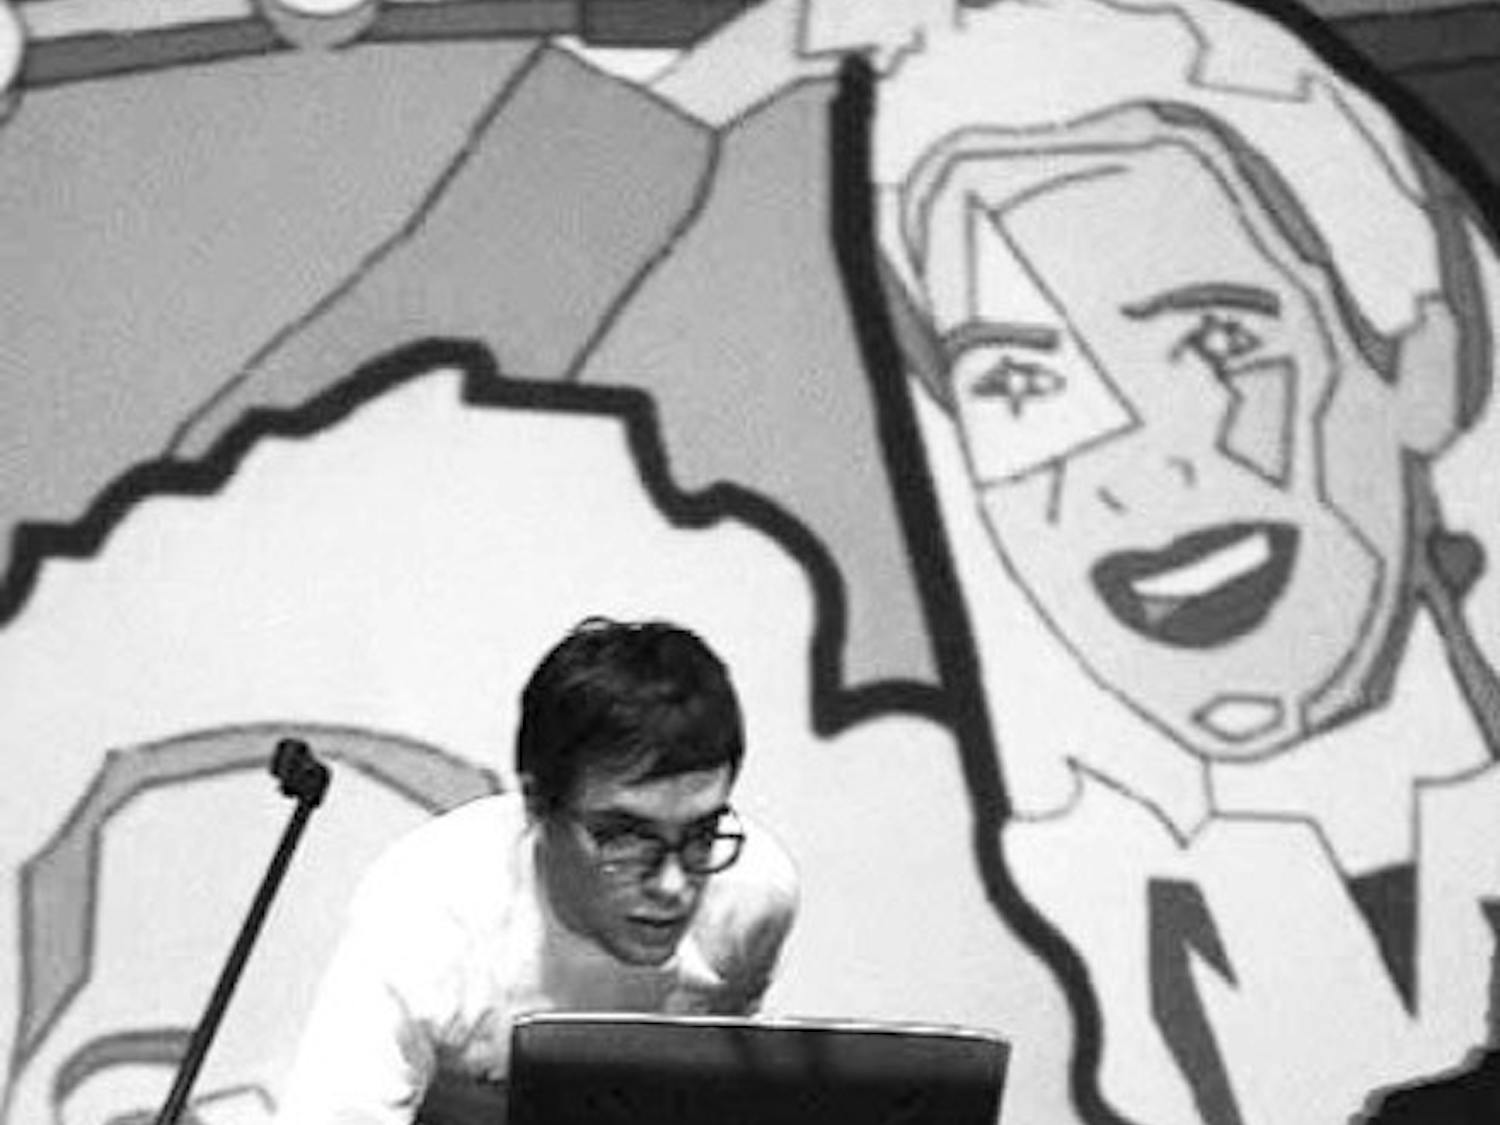 Earlier in his tour, Girl Talk played at the Andy Warhol Museum in Pittsburgh.